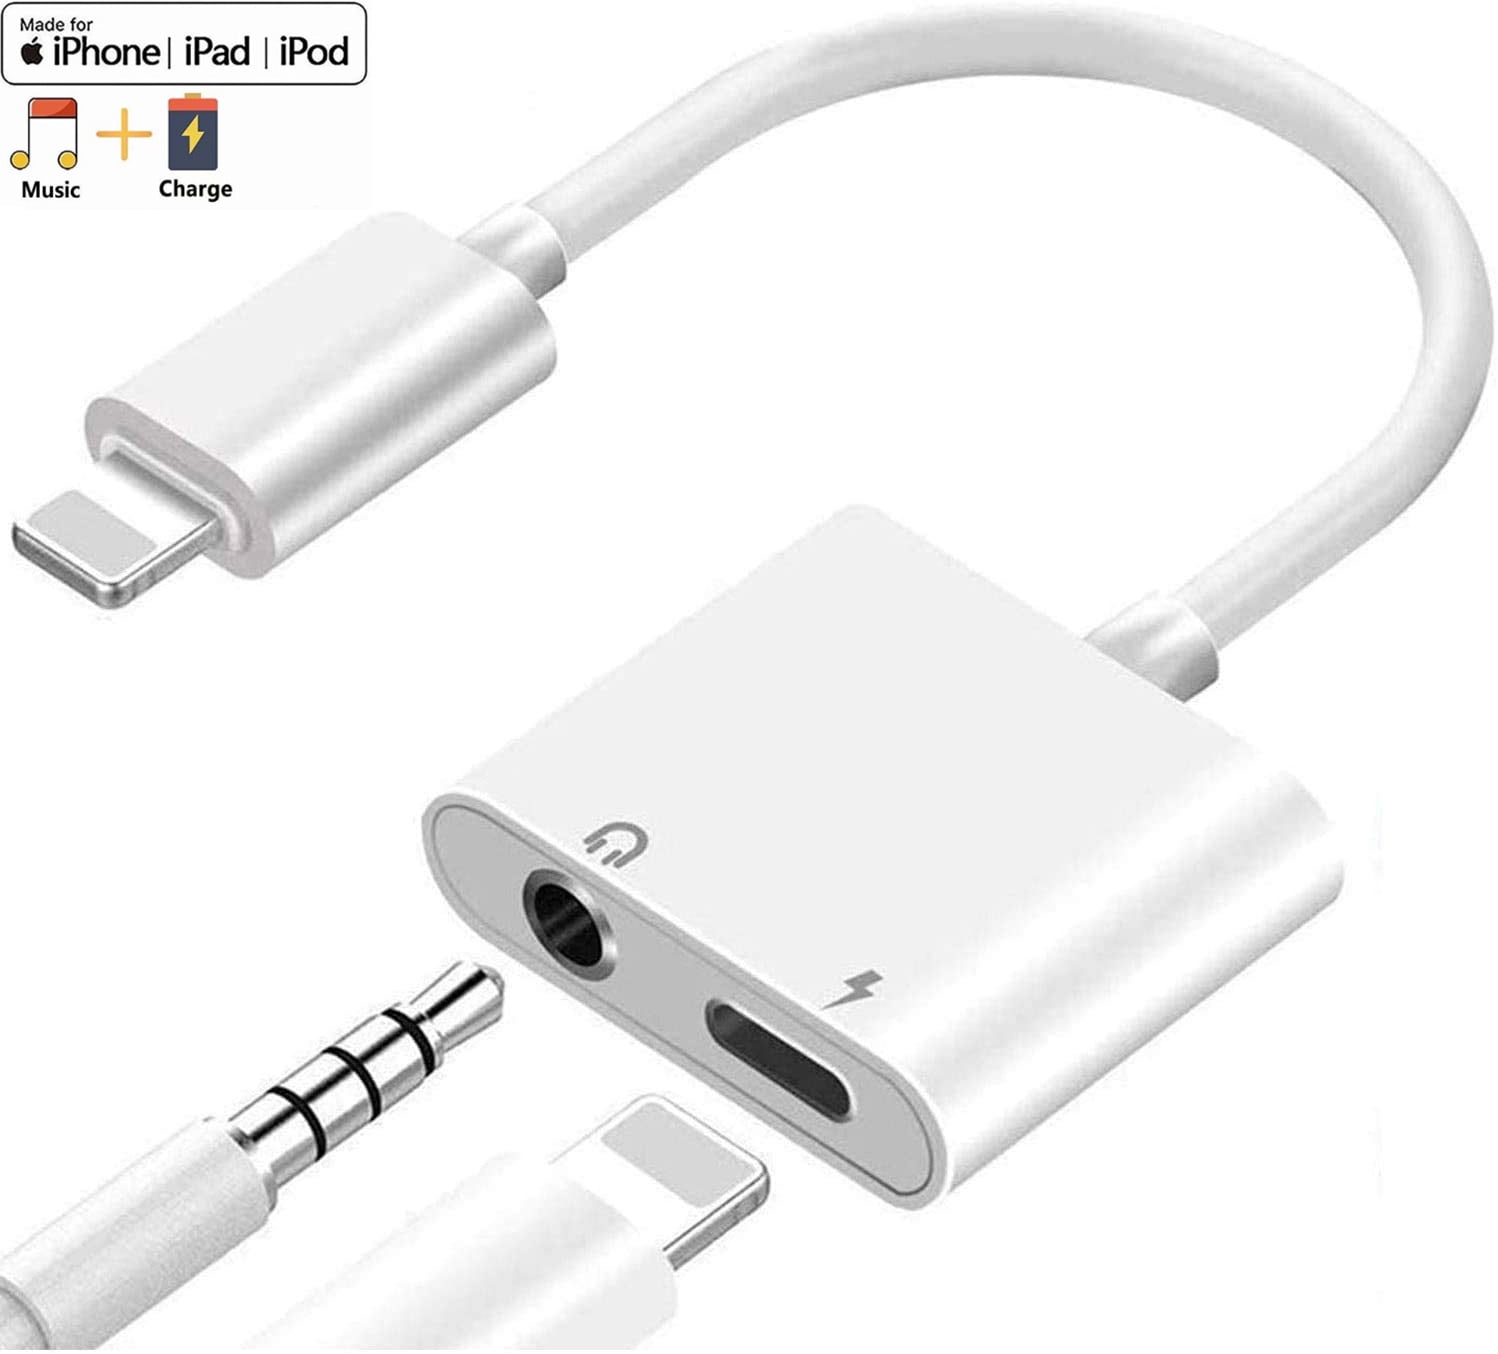 Headphones Adapter for iPhone 11 Jack 3.5mm Aux Audio Splitter Dongle Earphone Cable for iPhone 11 Pro//Xs//Xr//X//8 Plus//8//7 Plus//7 Headsets Accessories Cable Connector Support All iOS Systems-White